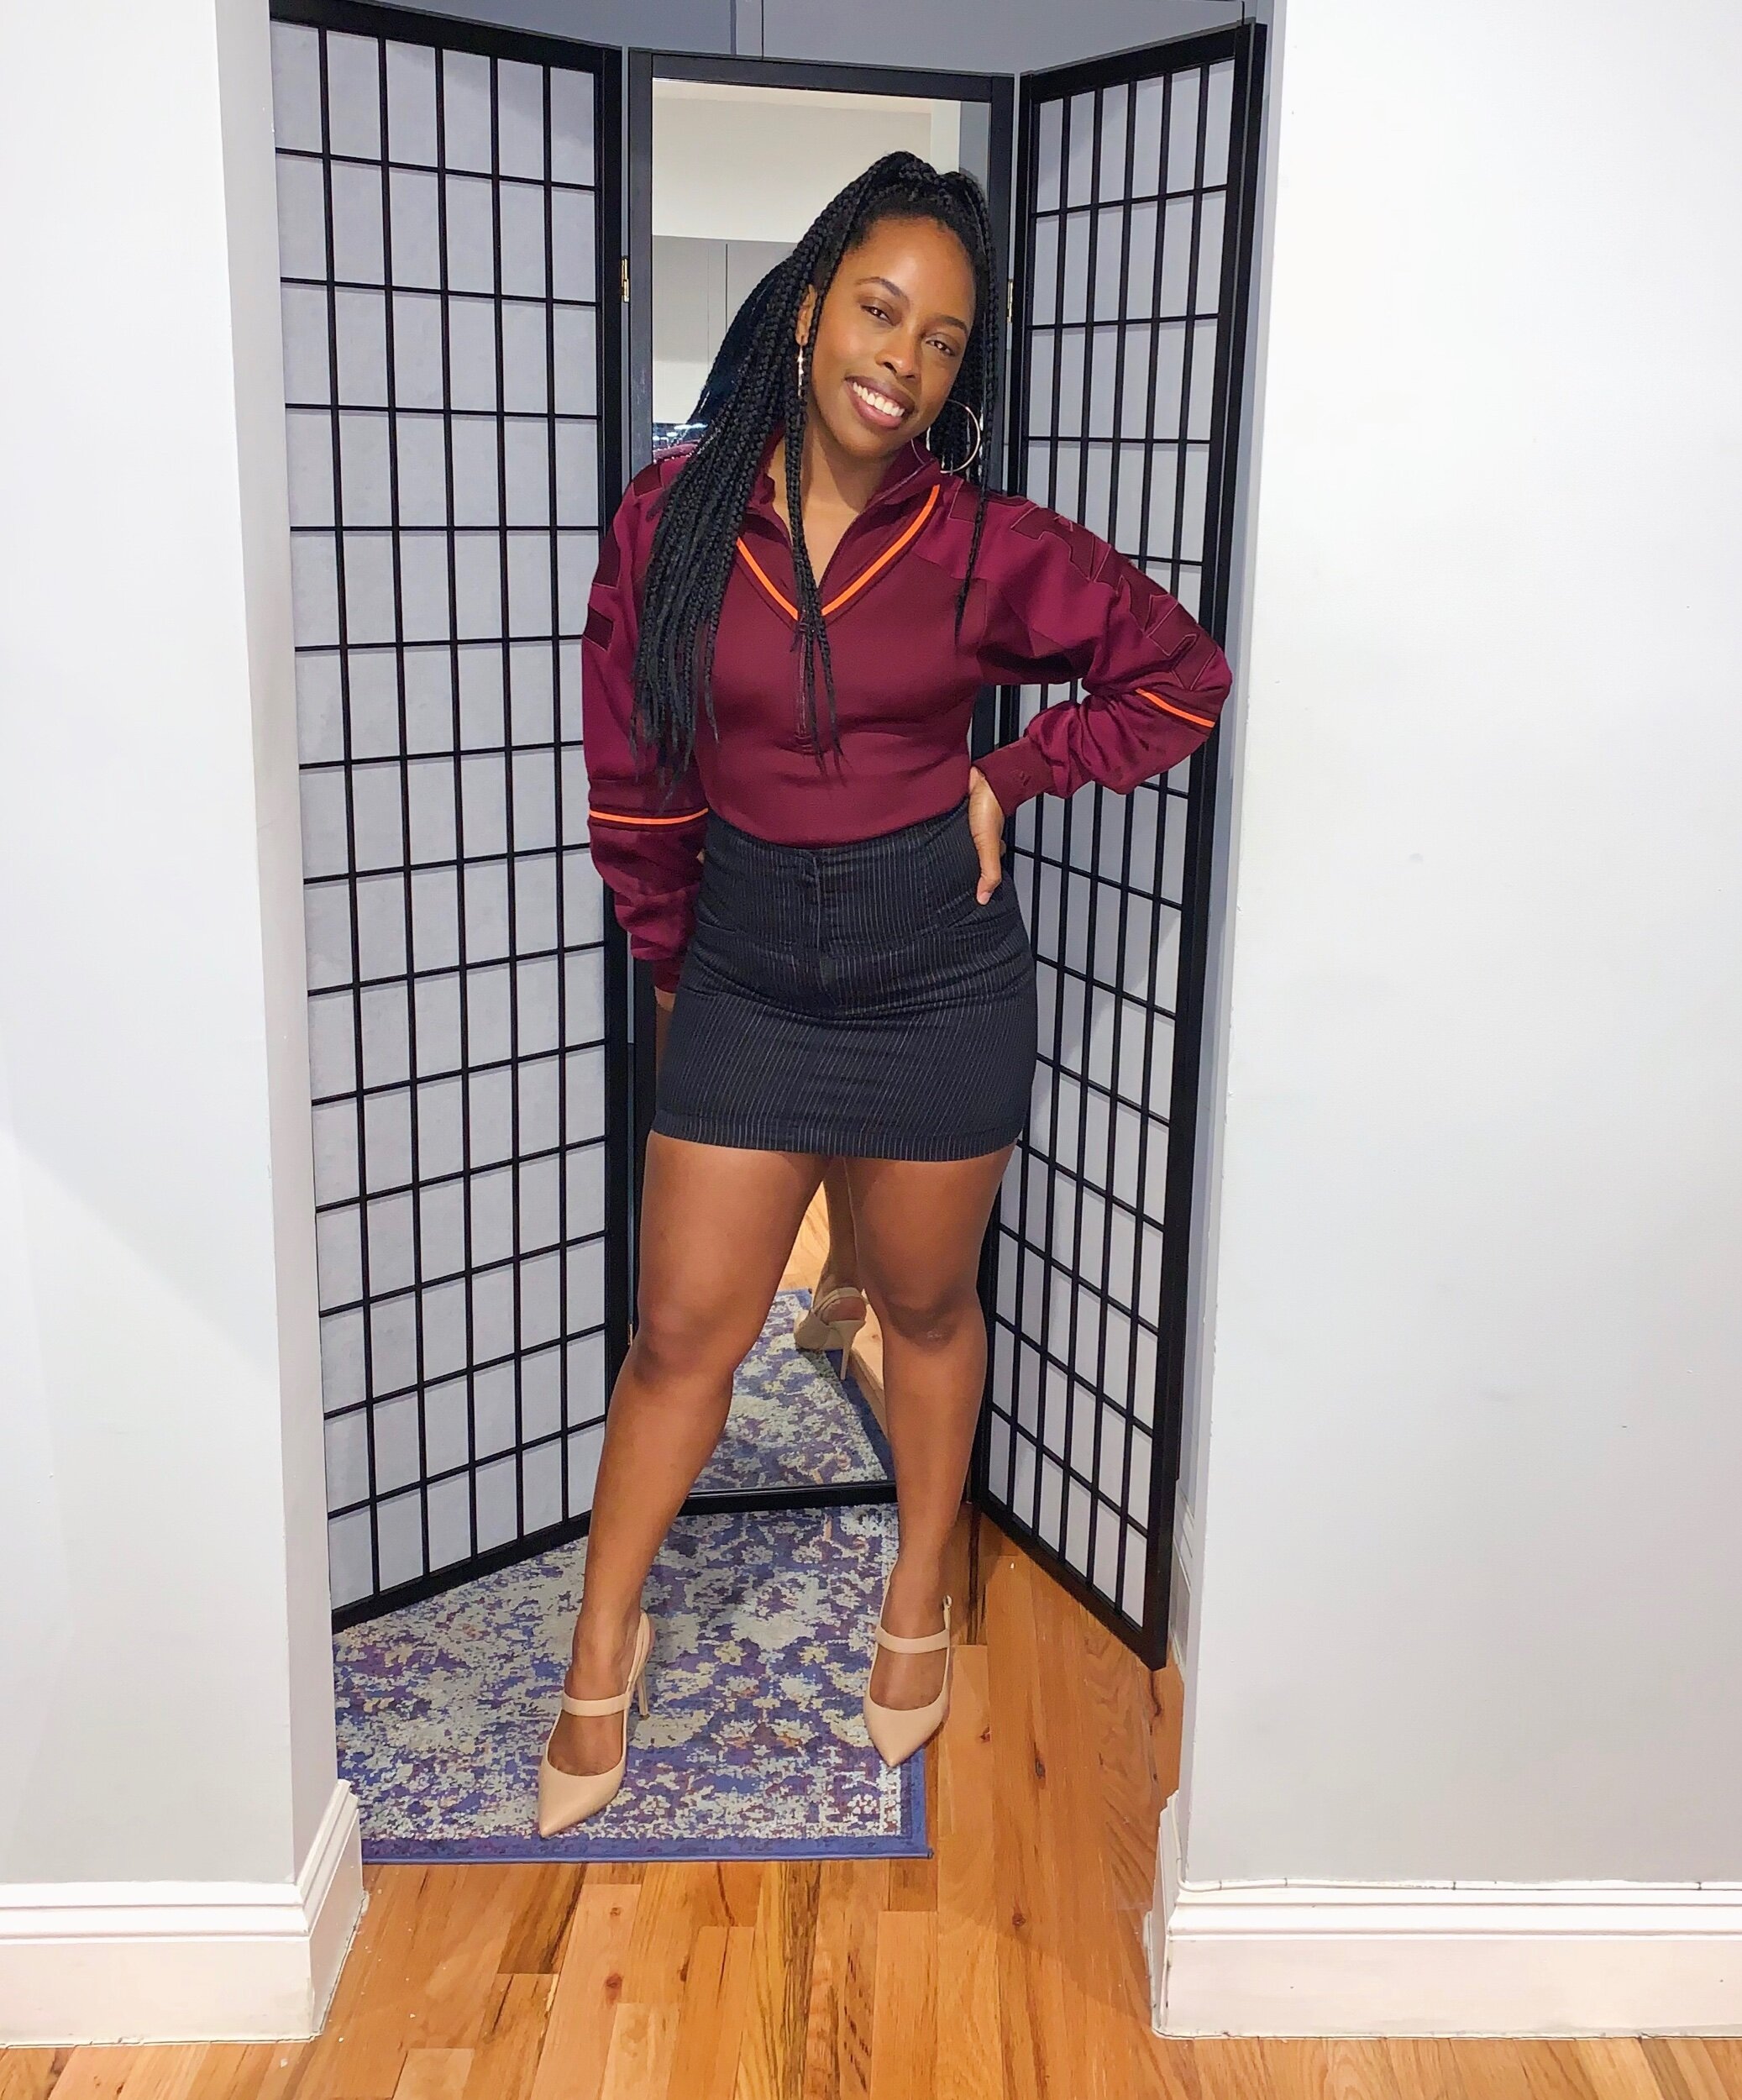   Outfit Combo #1: Mini-Skirt + Pointed Toe Pumps/Mules  